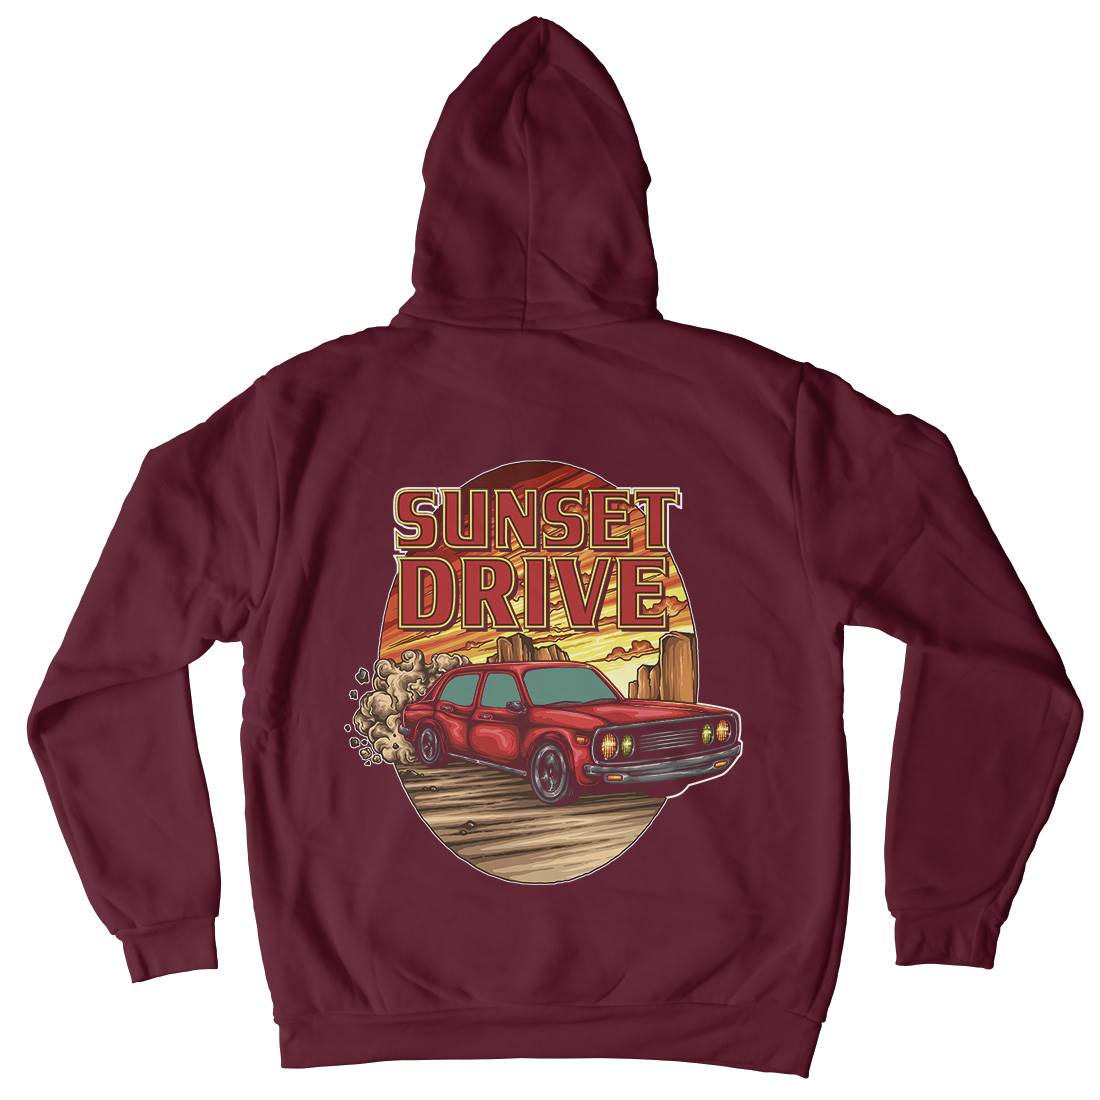 Sunset Drive Kids Crew Neck Hoodie Cars A472